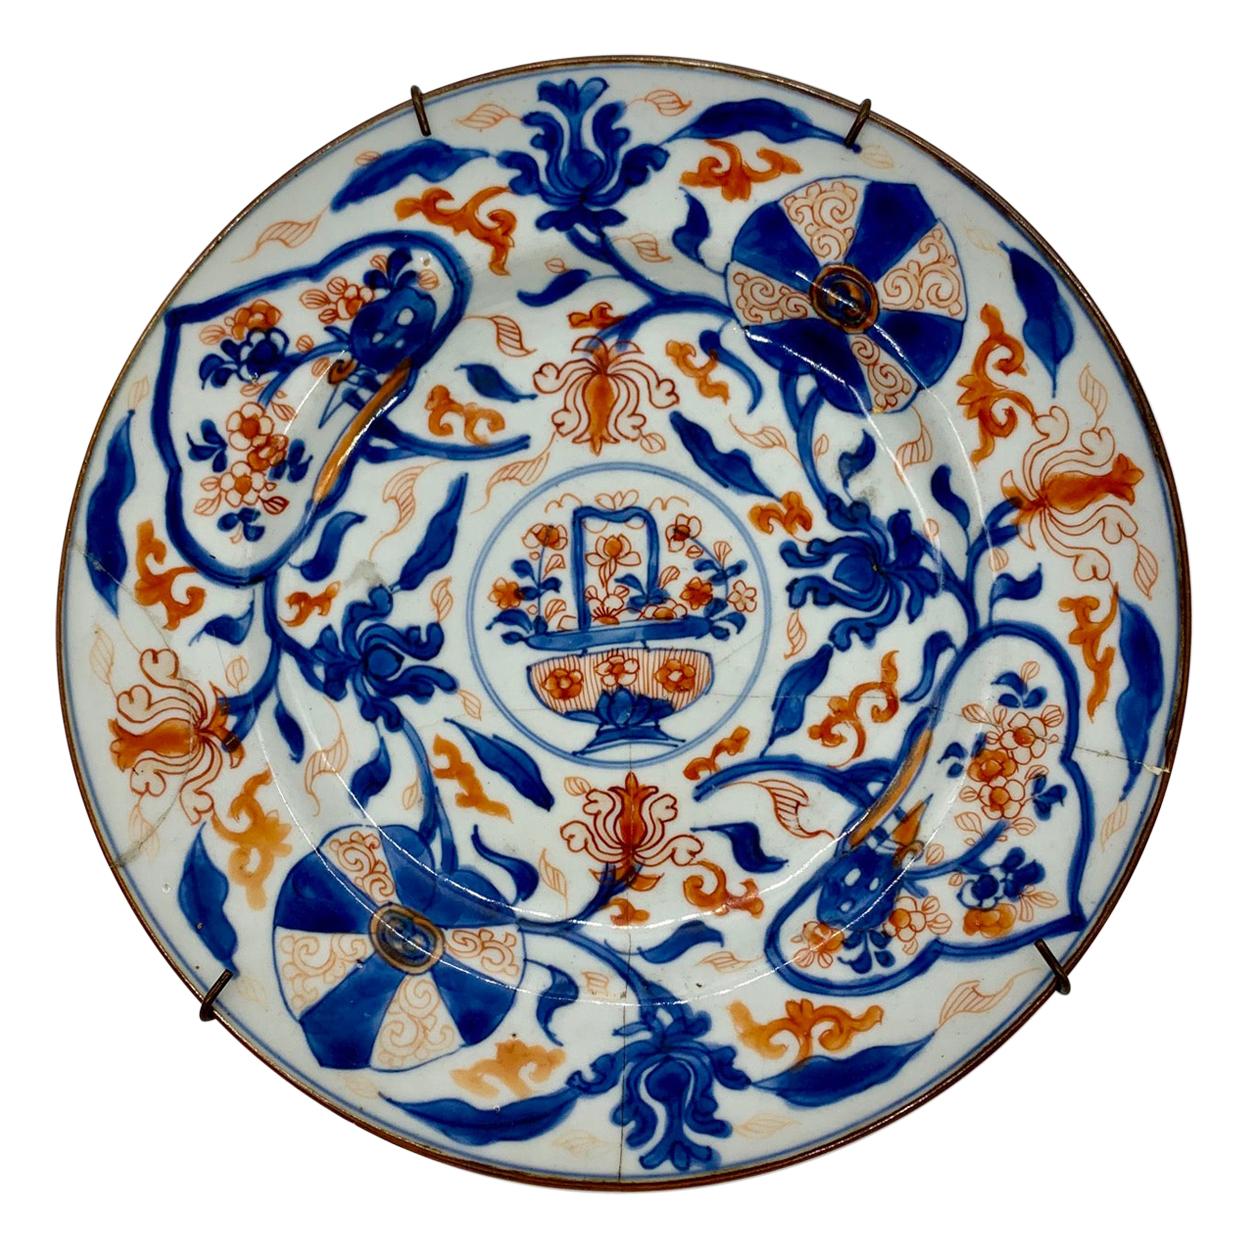 19th Century Chinese Plate with Blue and Orange Painted Flowers and Leaves